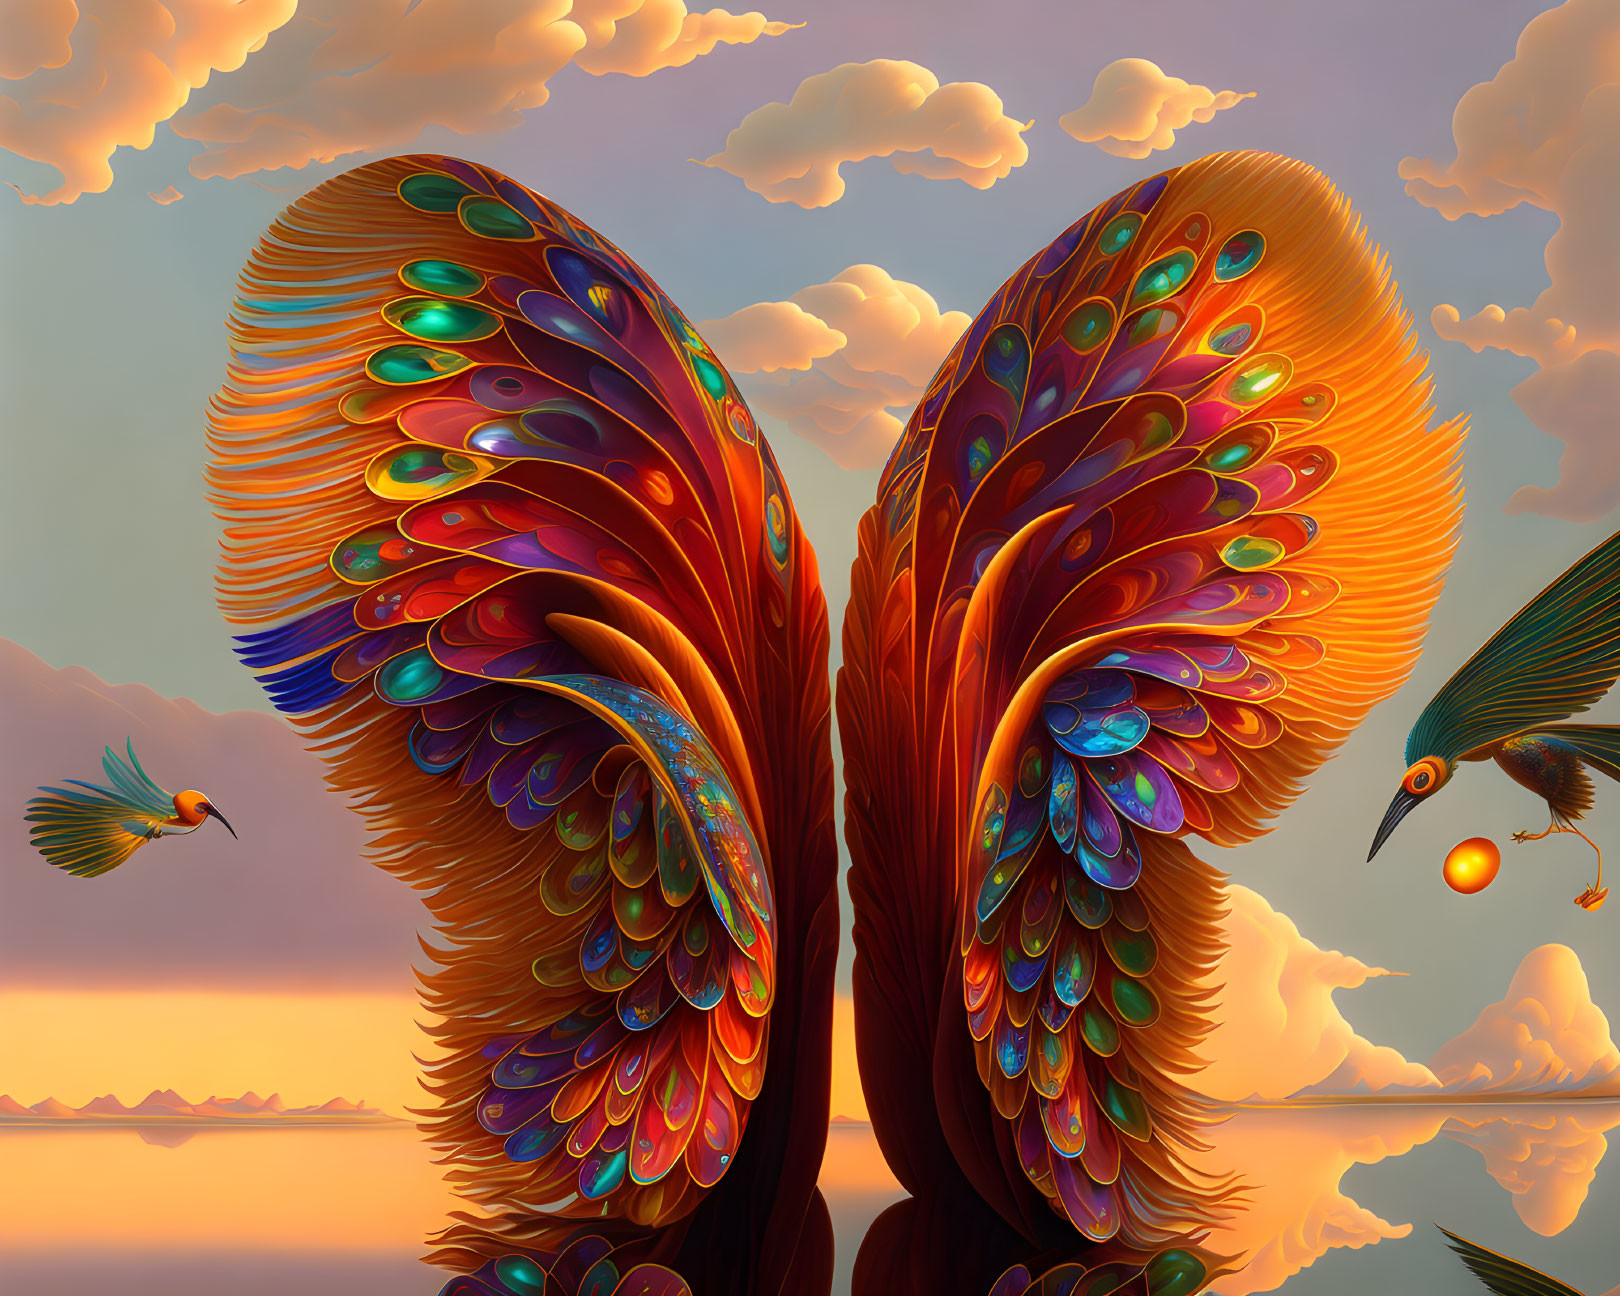 Colorful digital artwork of a stylized peacock in sunset sky with clouds.